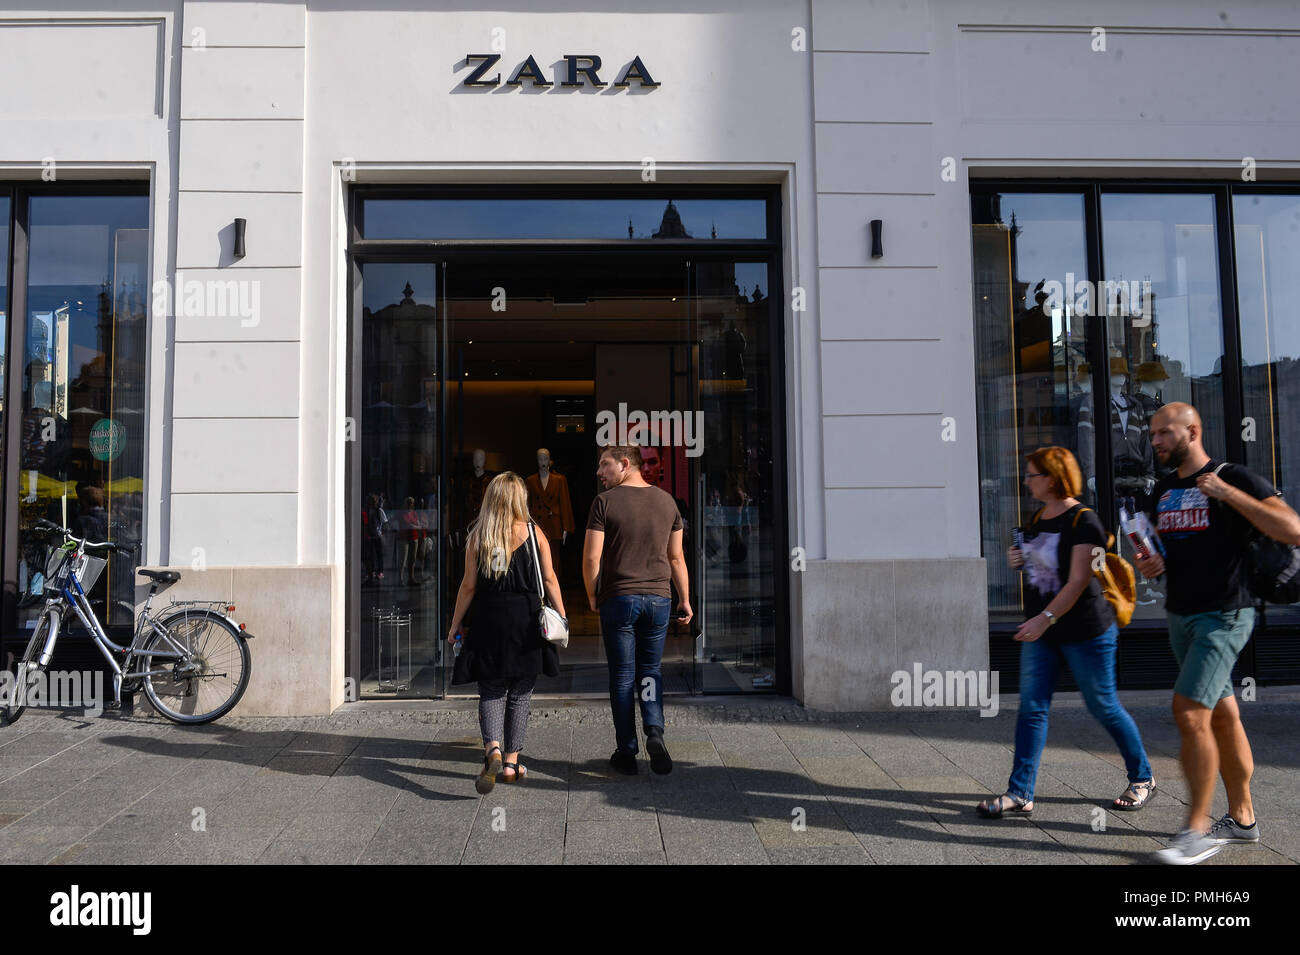 September 18, 2018 - Krakow, Poland - People seeen walking by a Zara shop  at the Main Square. (Credit Image: © Omar Marques/SOPA Images via ZUMA Wire  Stock Photo - Alamy